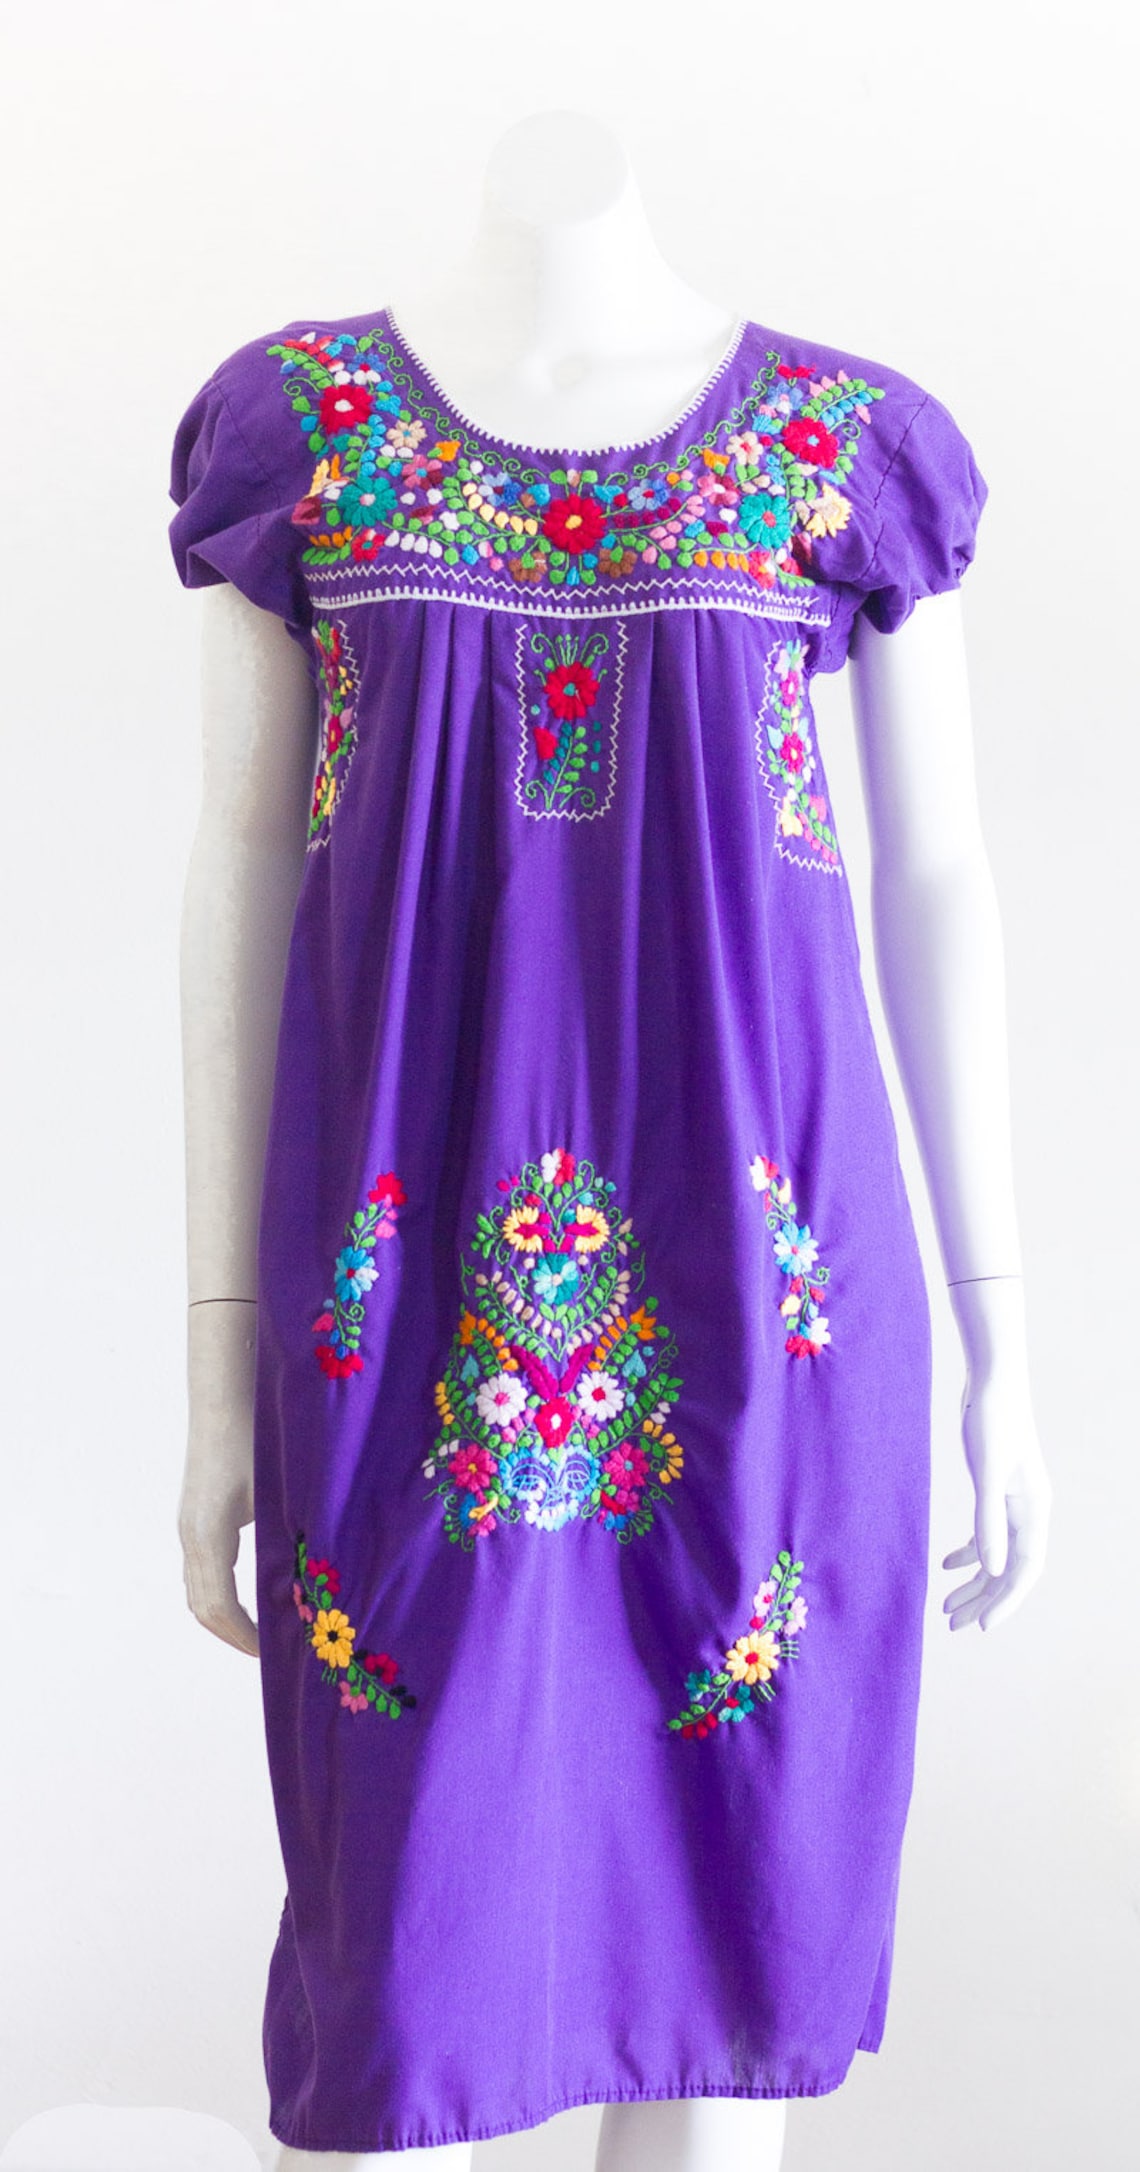 Purple embroidered Mexican dress | Etsy